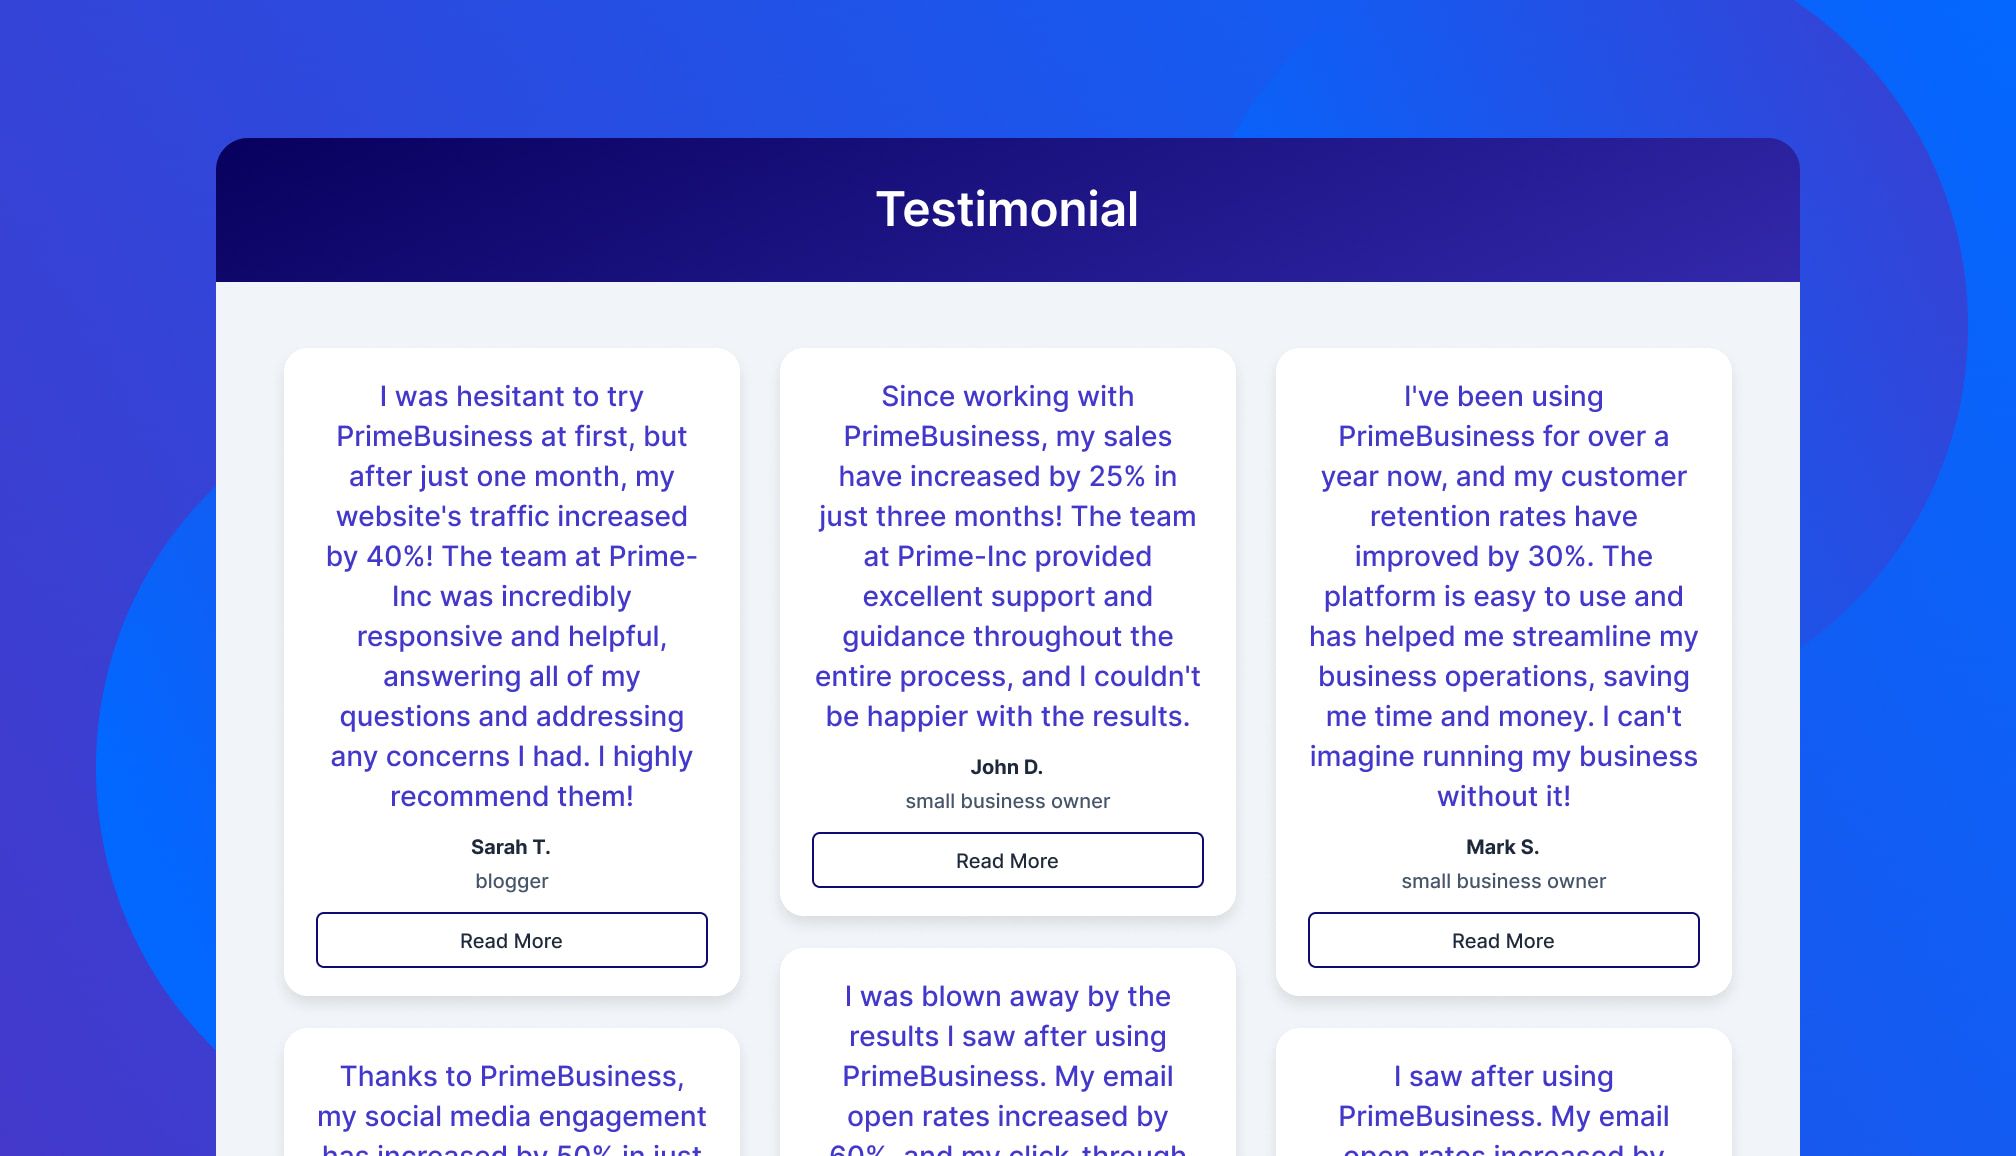 Beautiful testimonial page featuring case study excerpts